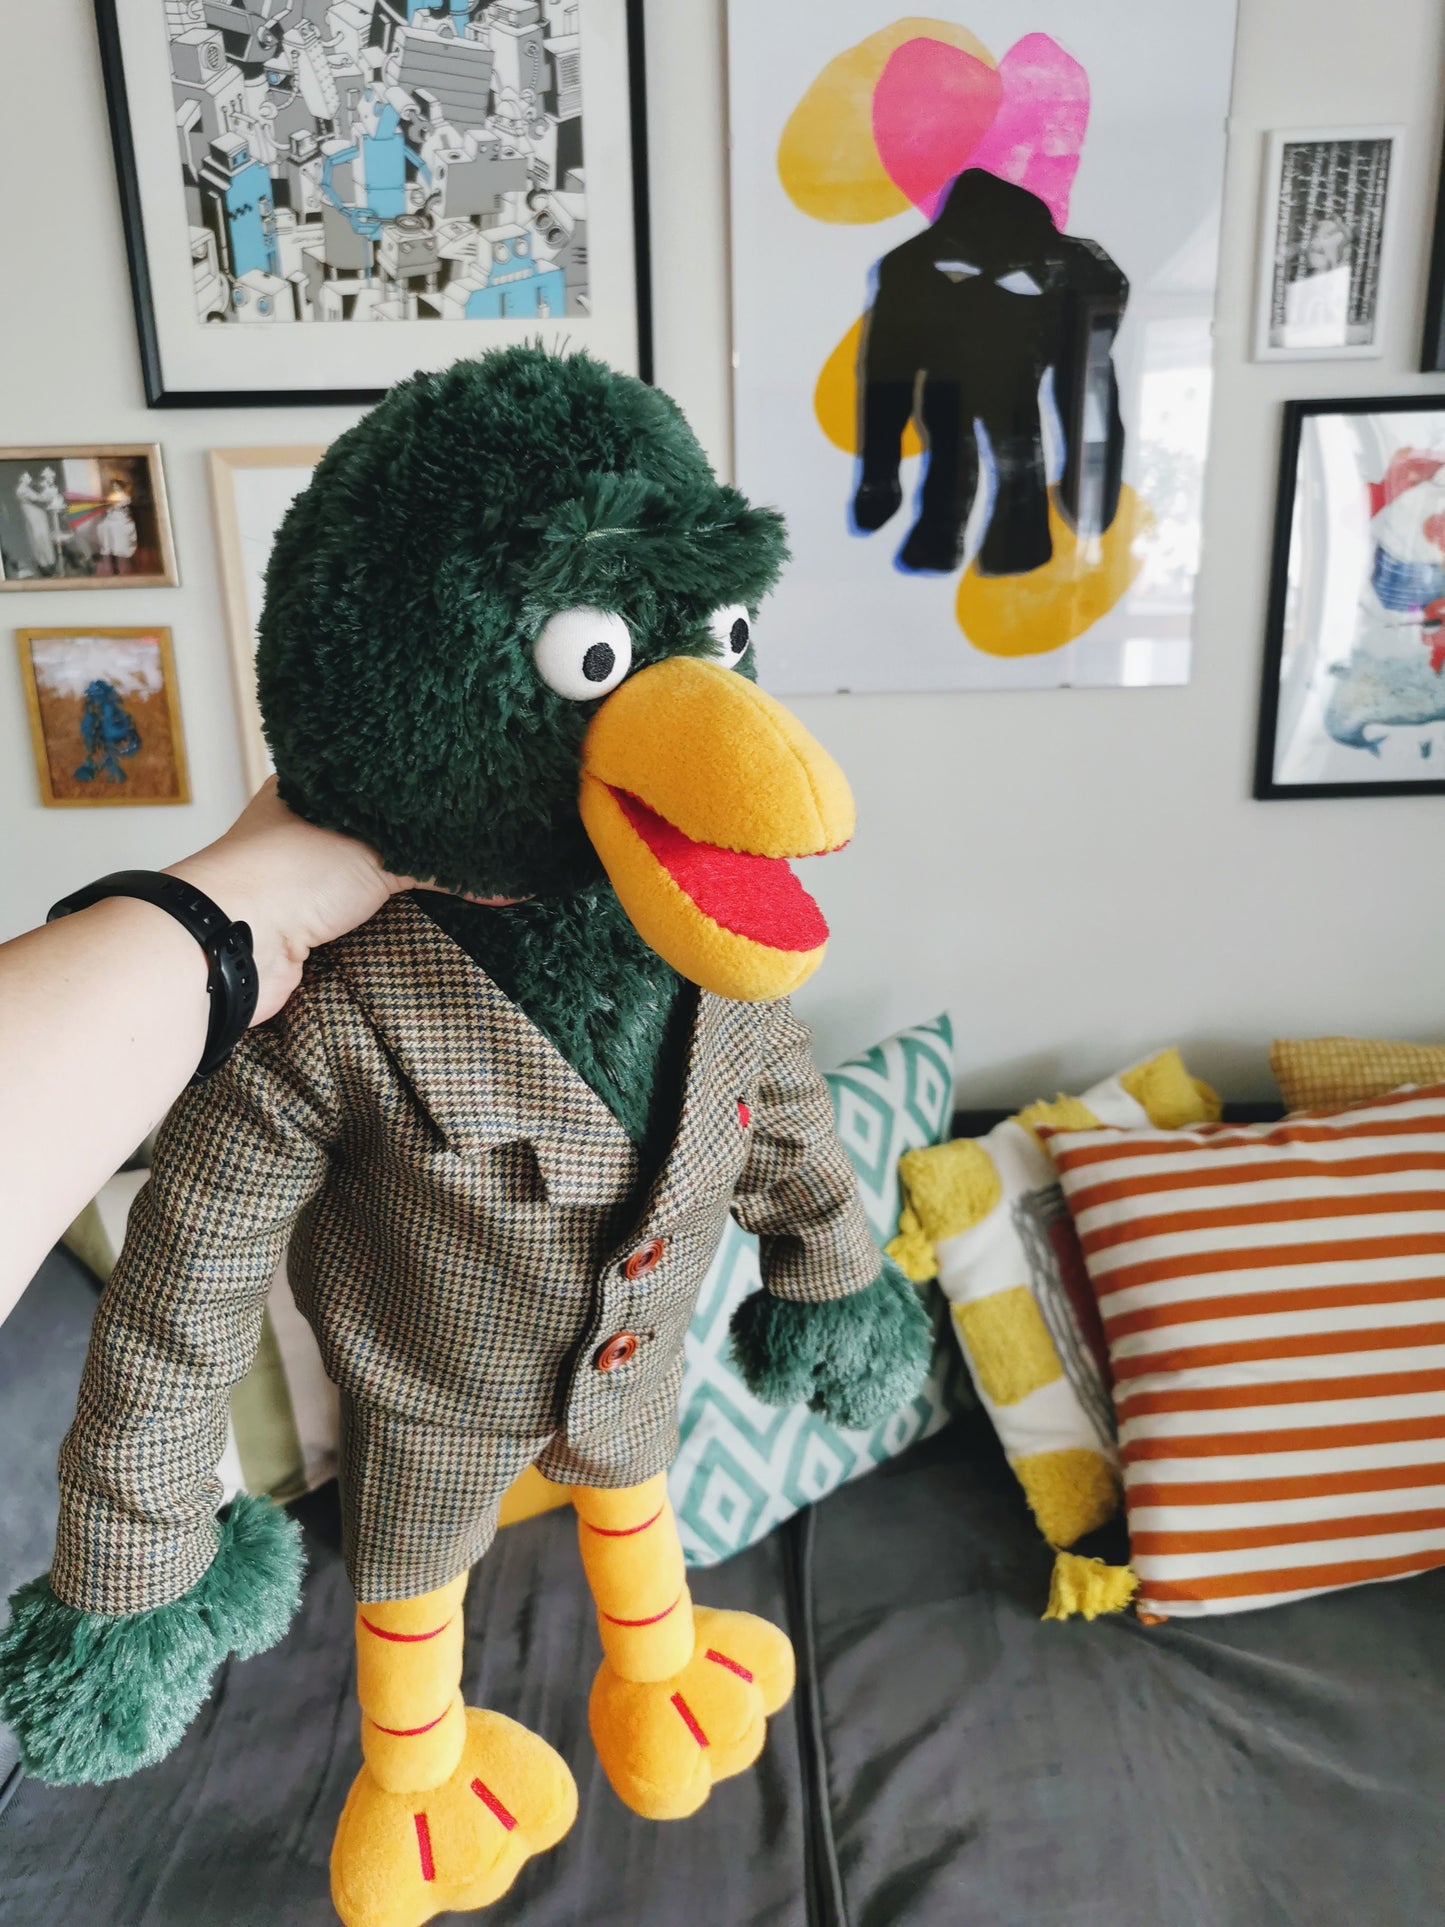 David Duck, Don't Hug Me I'm Scared replica collector's plush, Custom green duck plush inspired by DHMIS, David duck in suit 50 cm